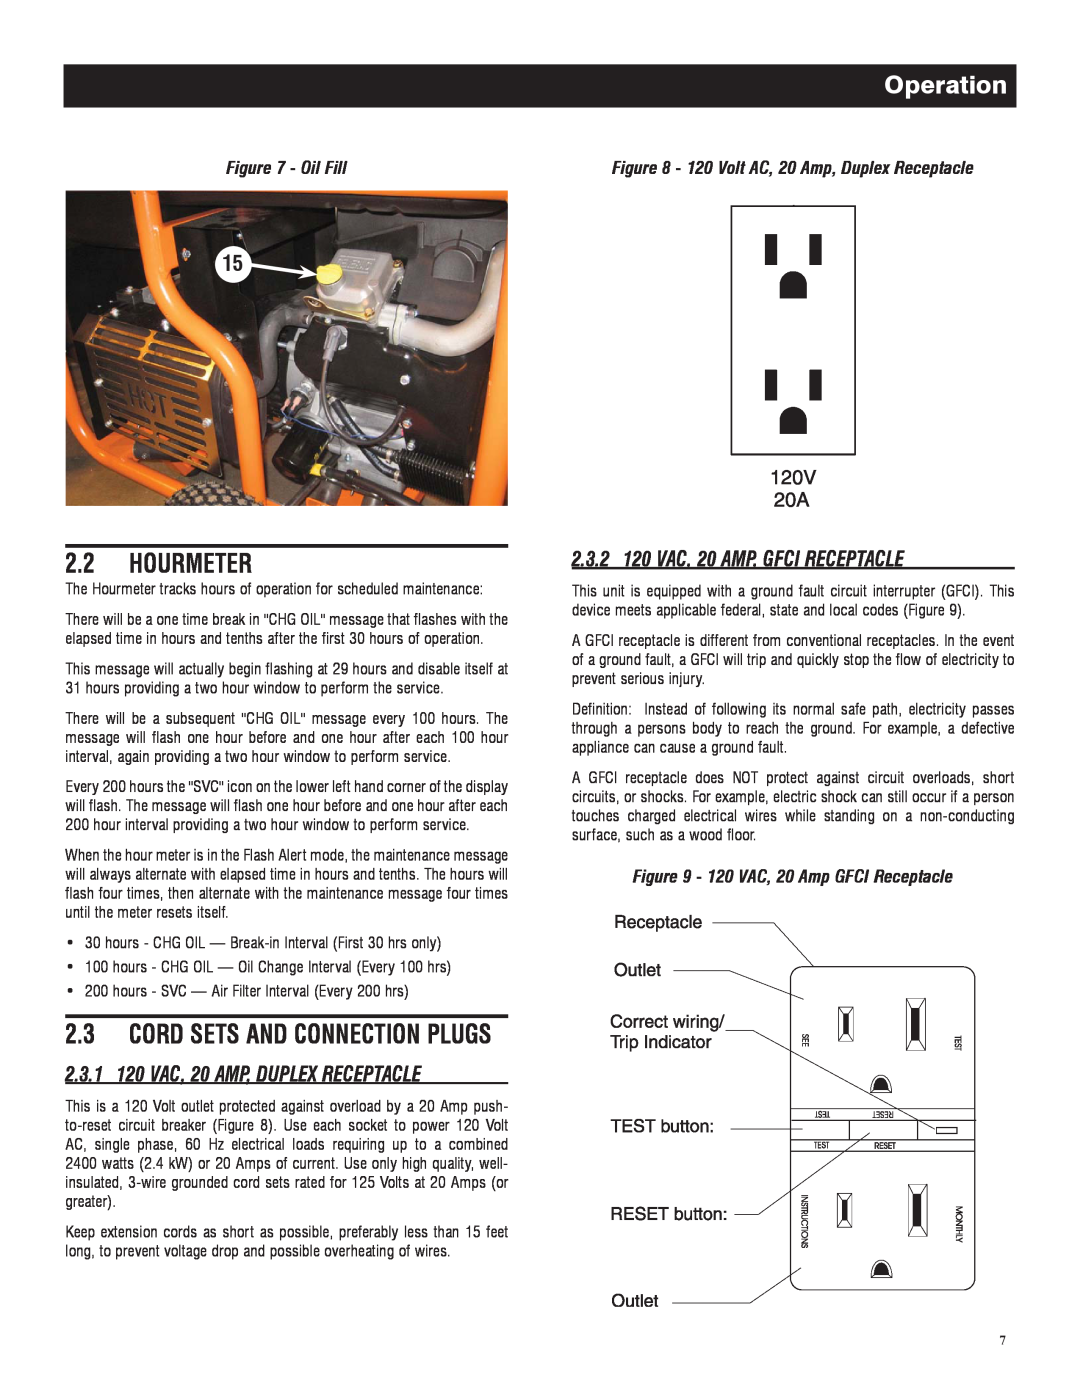 Generac 005735-0 Hourmeter, Cord Sets And Connection Plugs, 2.3.1 120 VAC, 20 AMP, DUPLEX RECEPTACLE, Operation, Oil Fill 